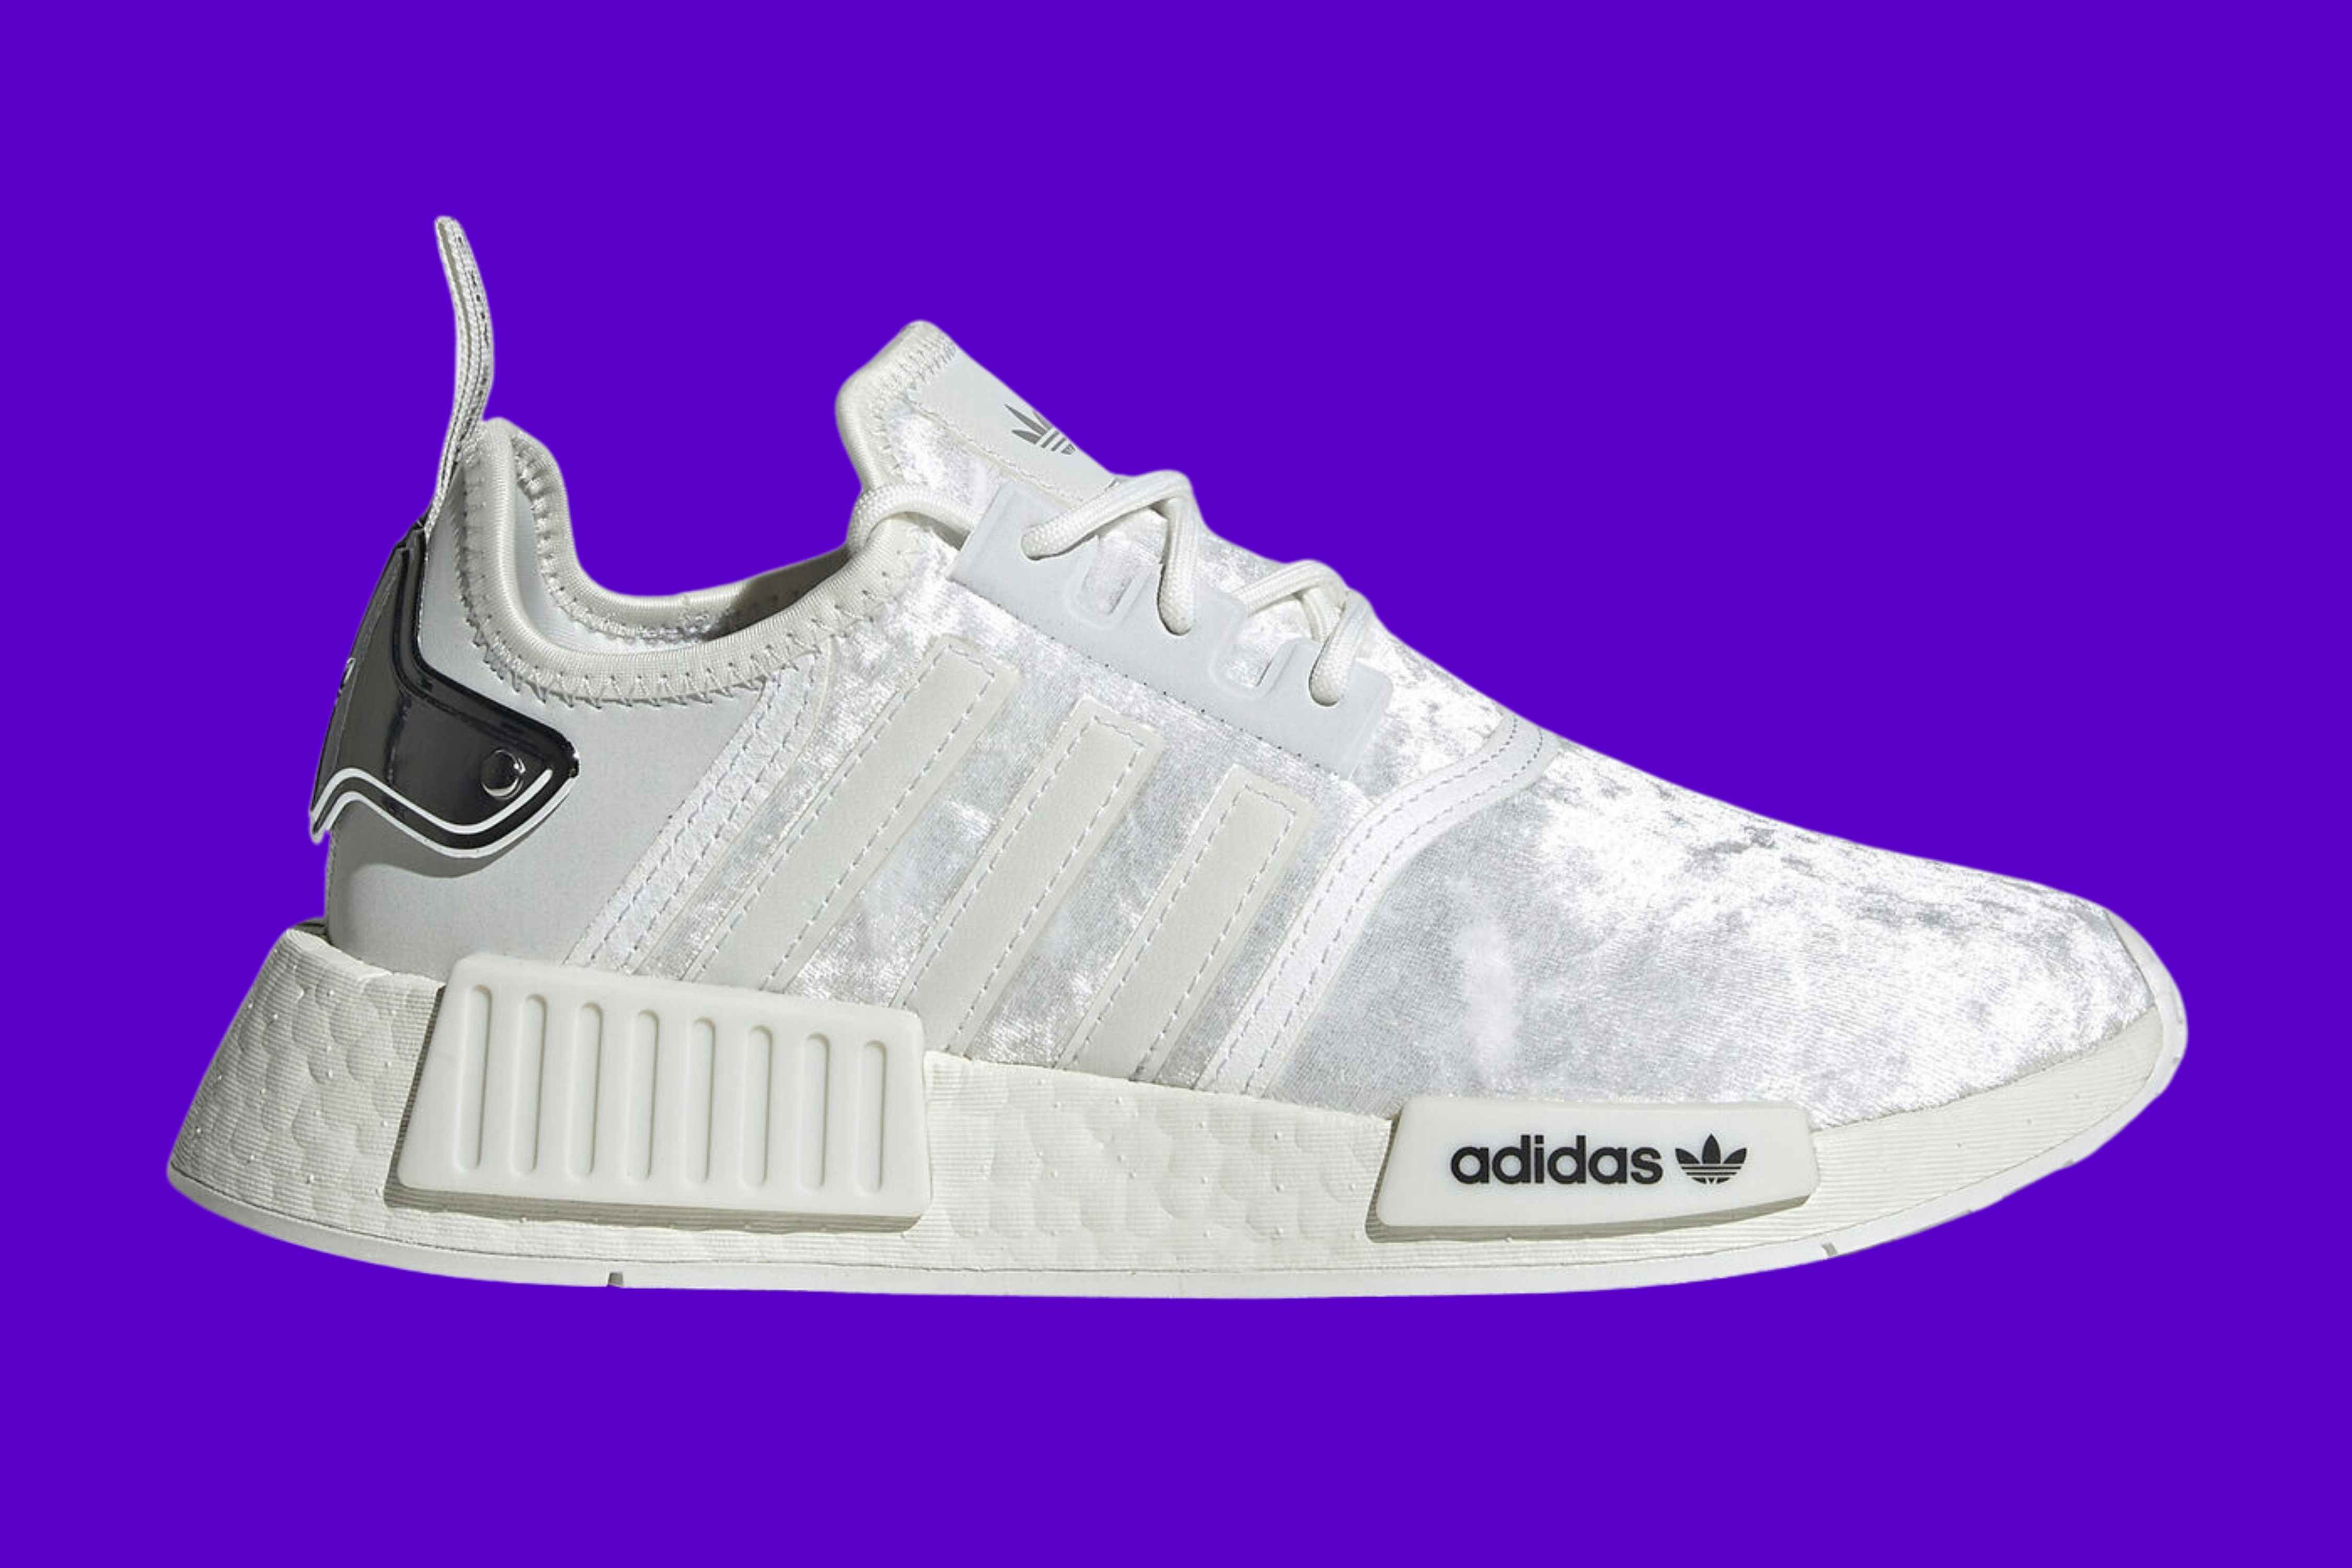 Adidas Women's NMC_R1 Shoes, Only $48 Shipped at eBay (Reg. $150)